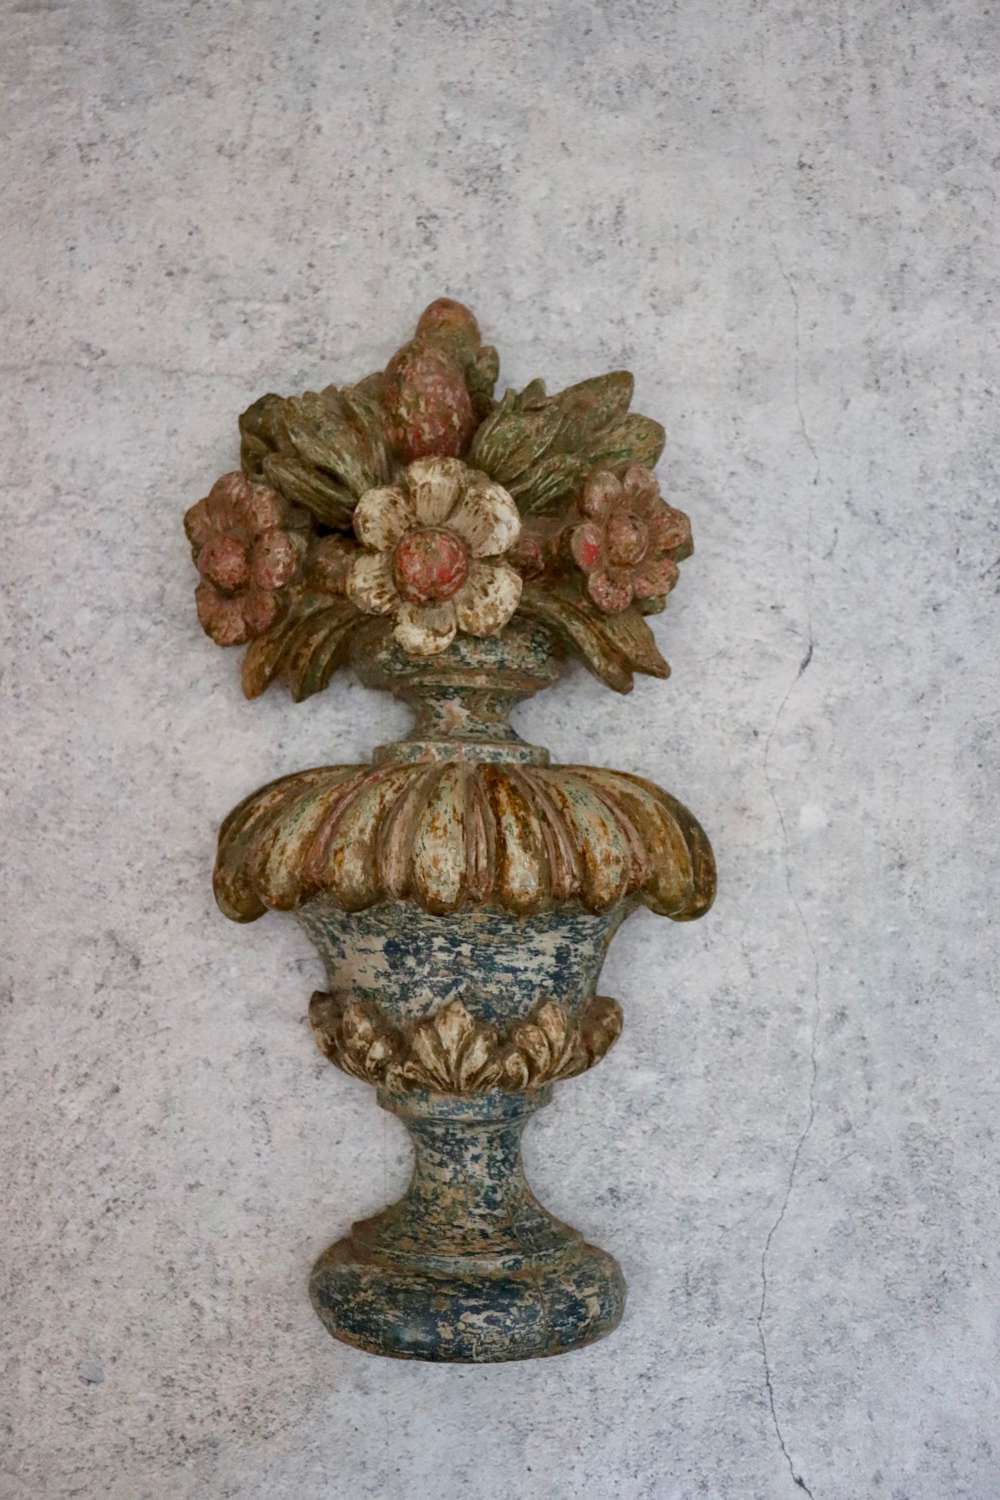 Victorian carving of flowers in an urn